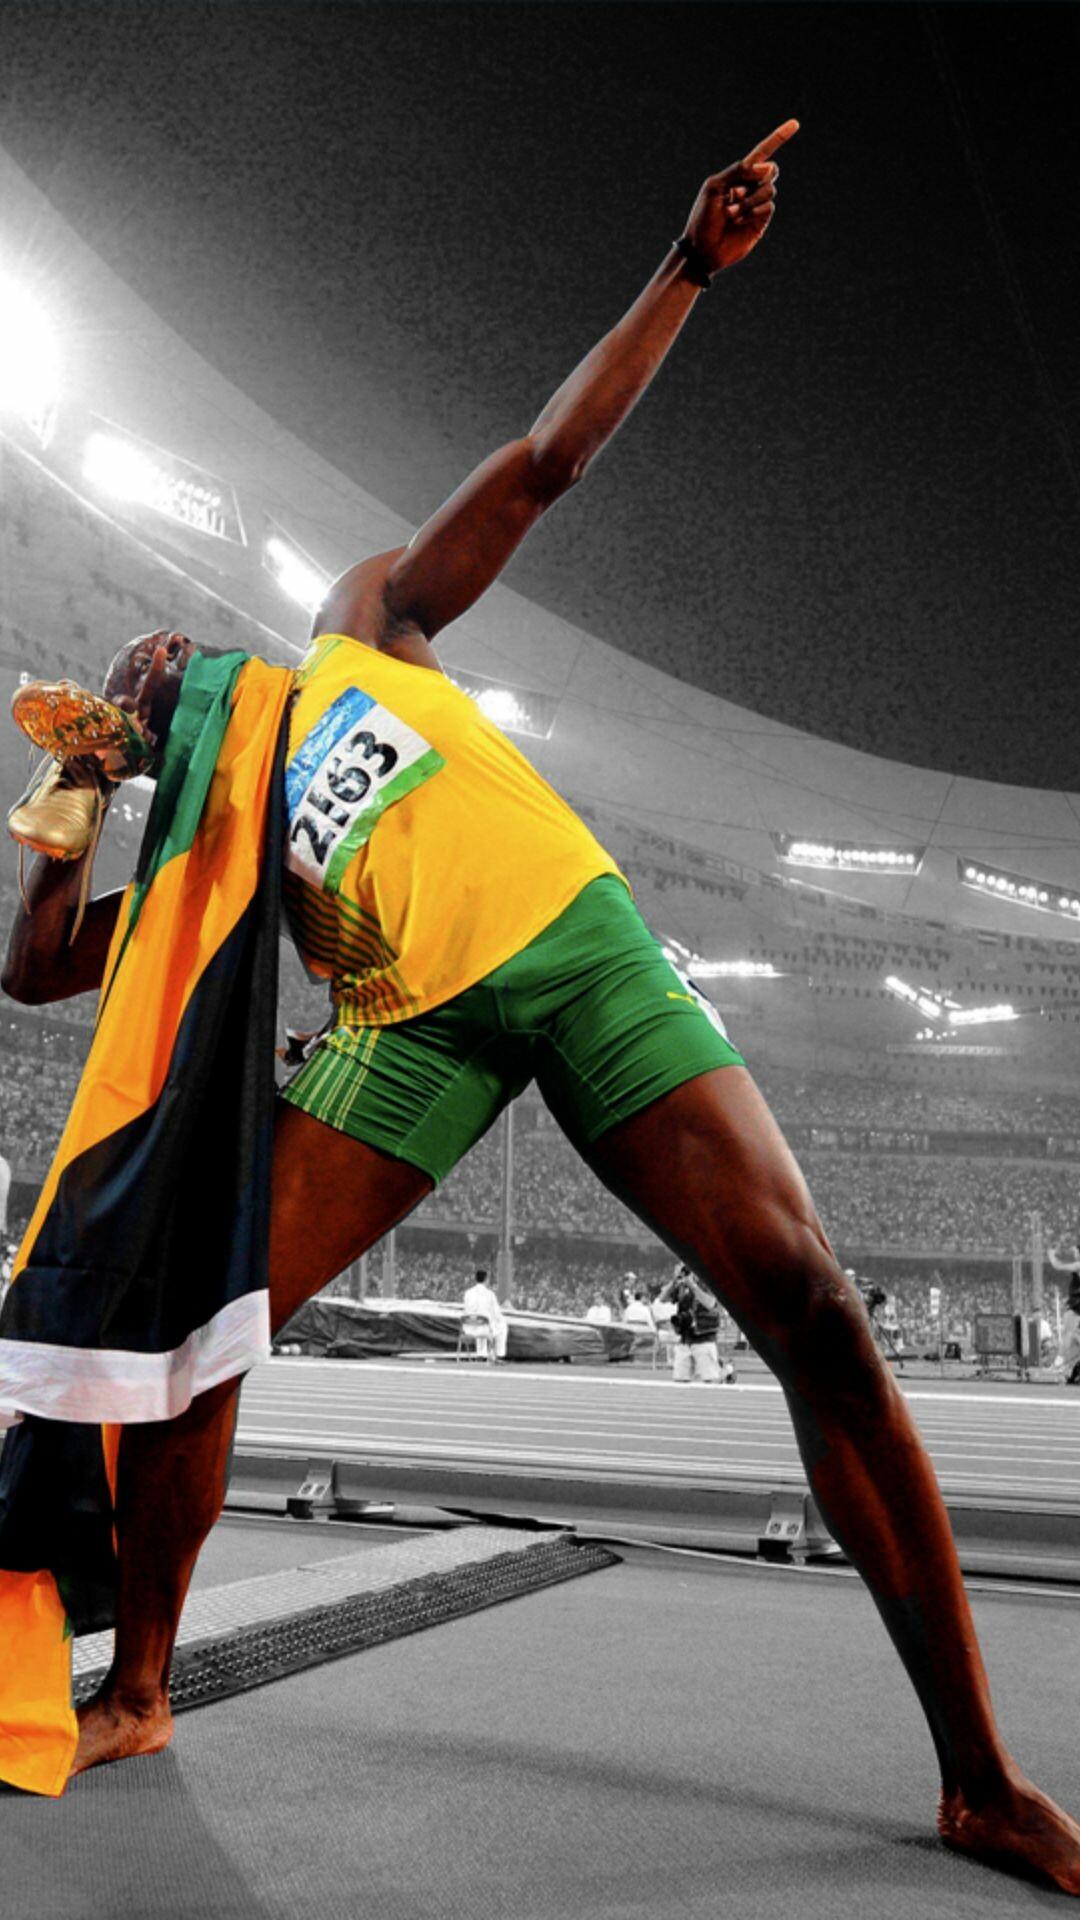 Usain Bolt: He won the 100 meters gold medal at the 2012 London Olympics, with a time of 9.63 seconds. 1080x1920 Full HD Wallpaper.